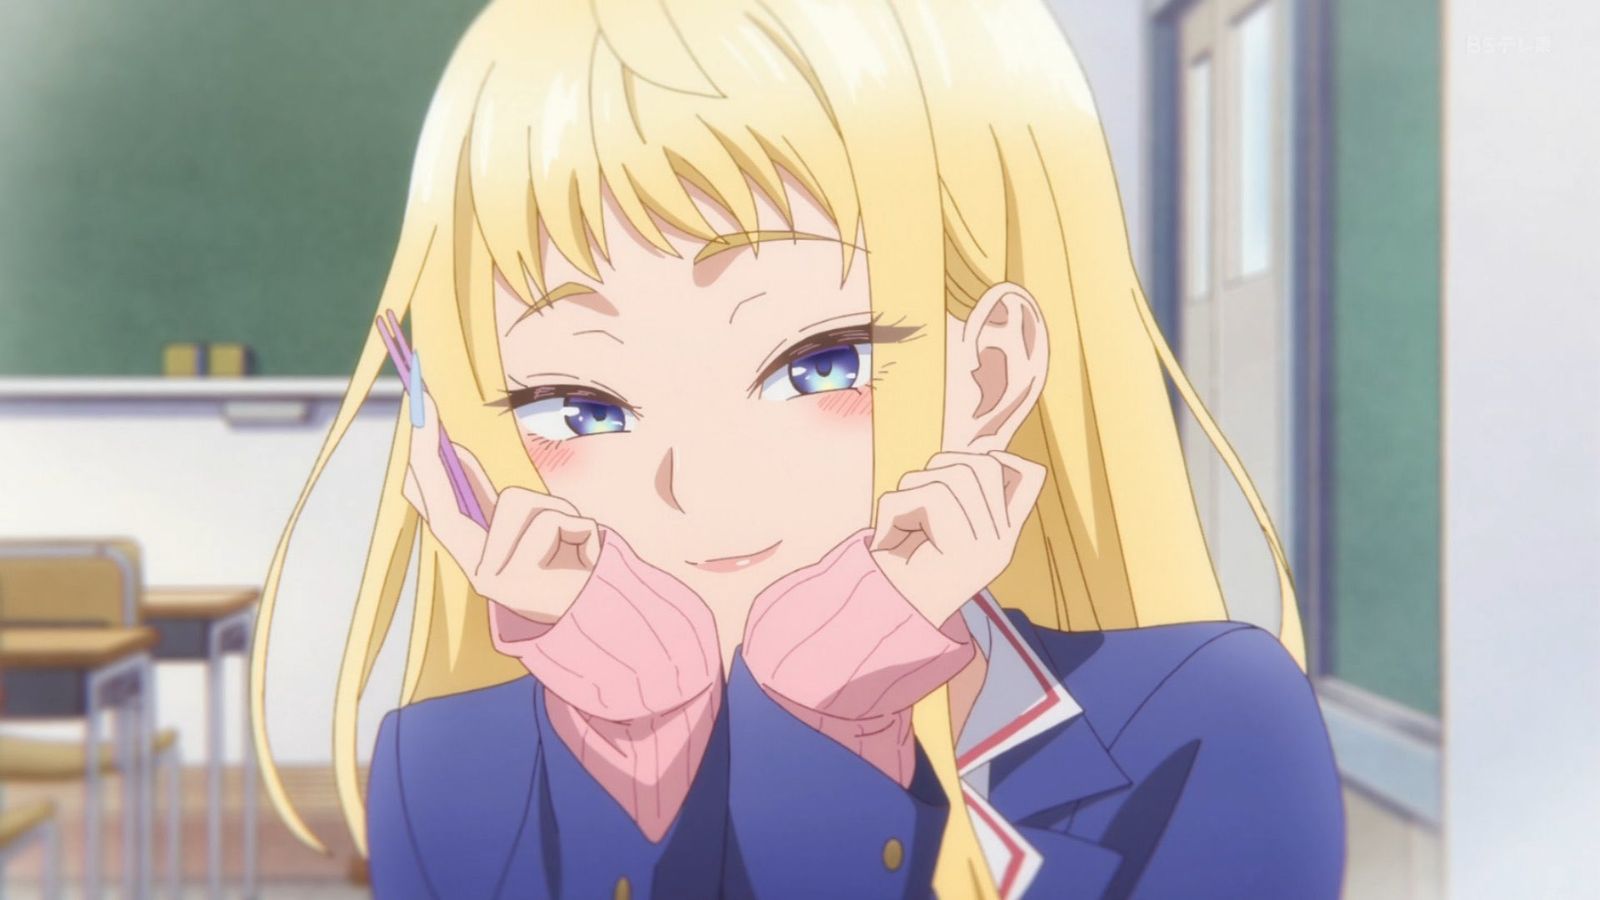 When Will Hokkaido Gals Are Super Adorable Get an English Dub? Our Predictions Minami